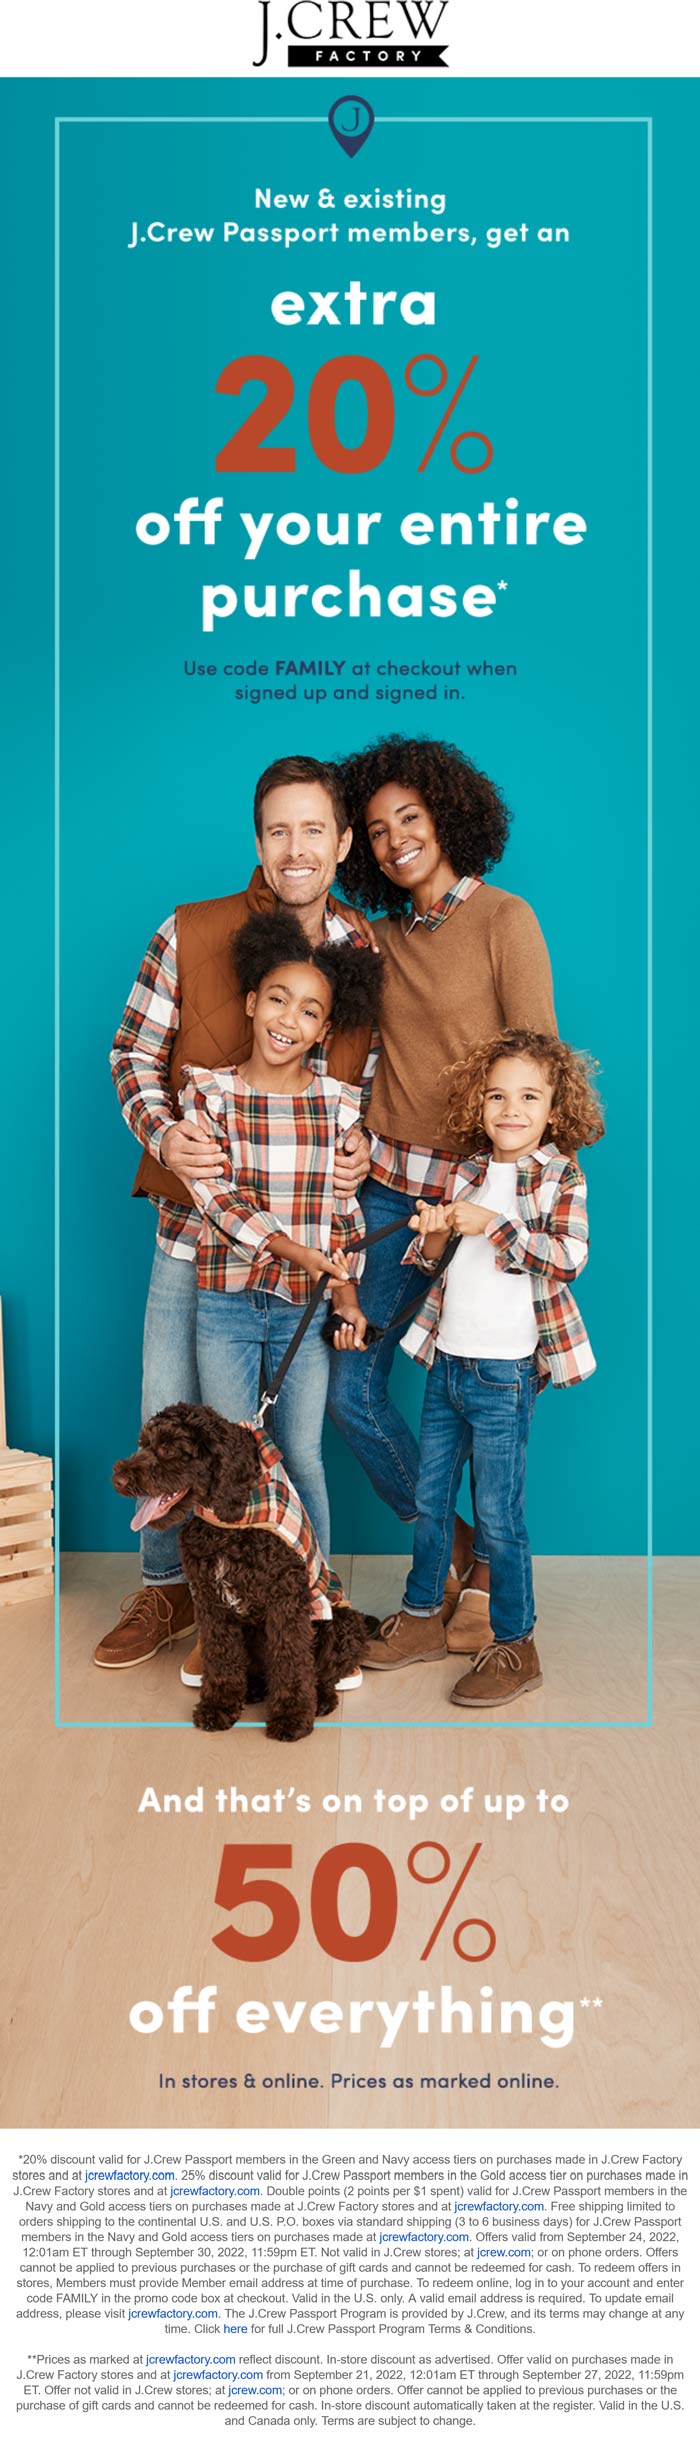 J.Crew Factory stores Coupon  Extra 20% off & more at J.Crew Factory, or online via promo code FAMILY #jcrewfactory 